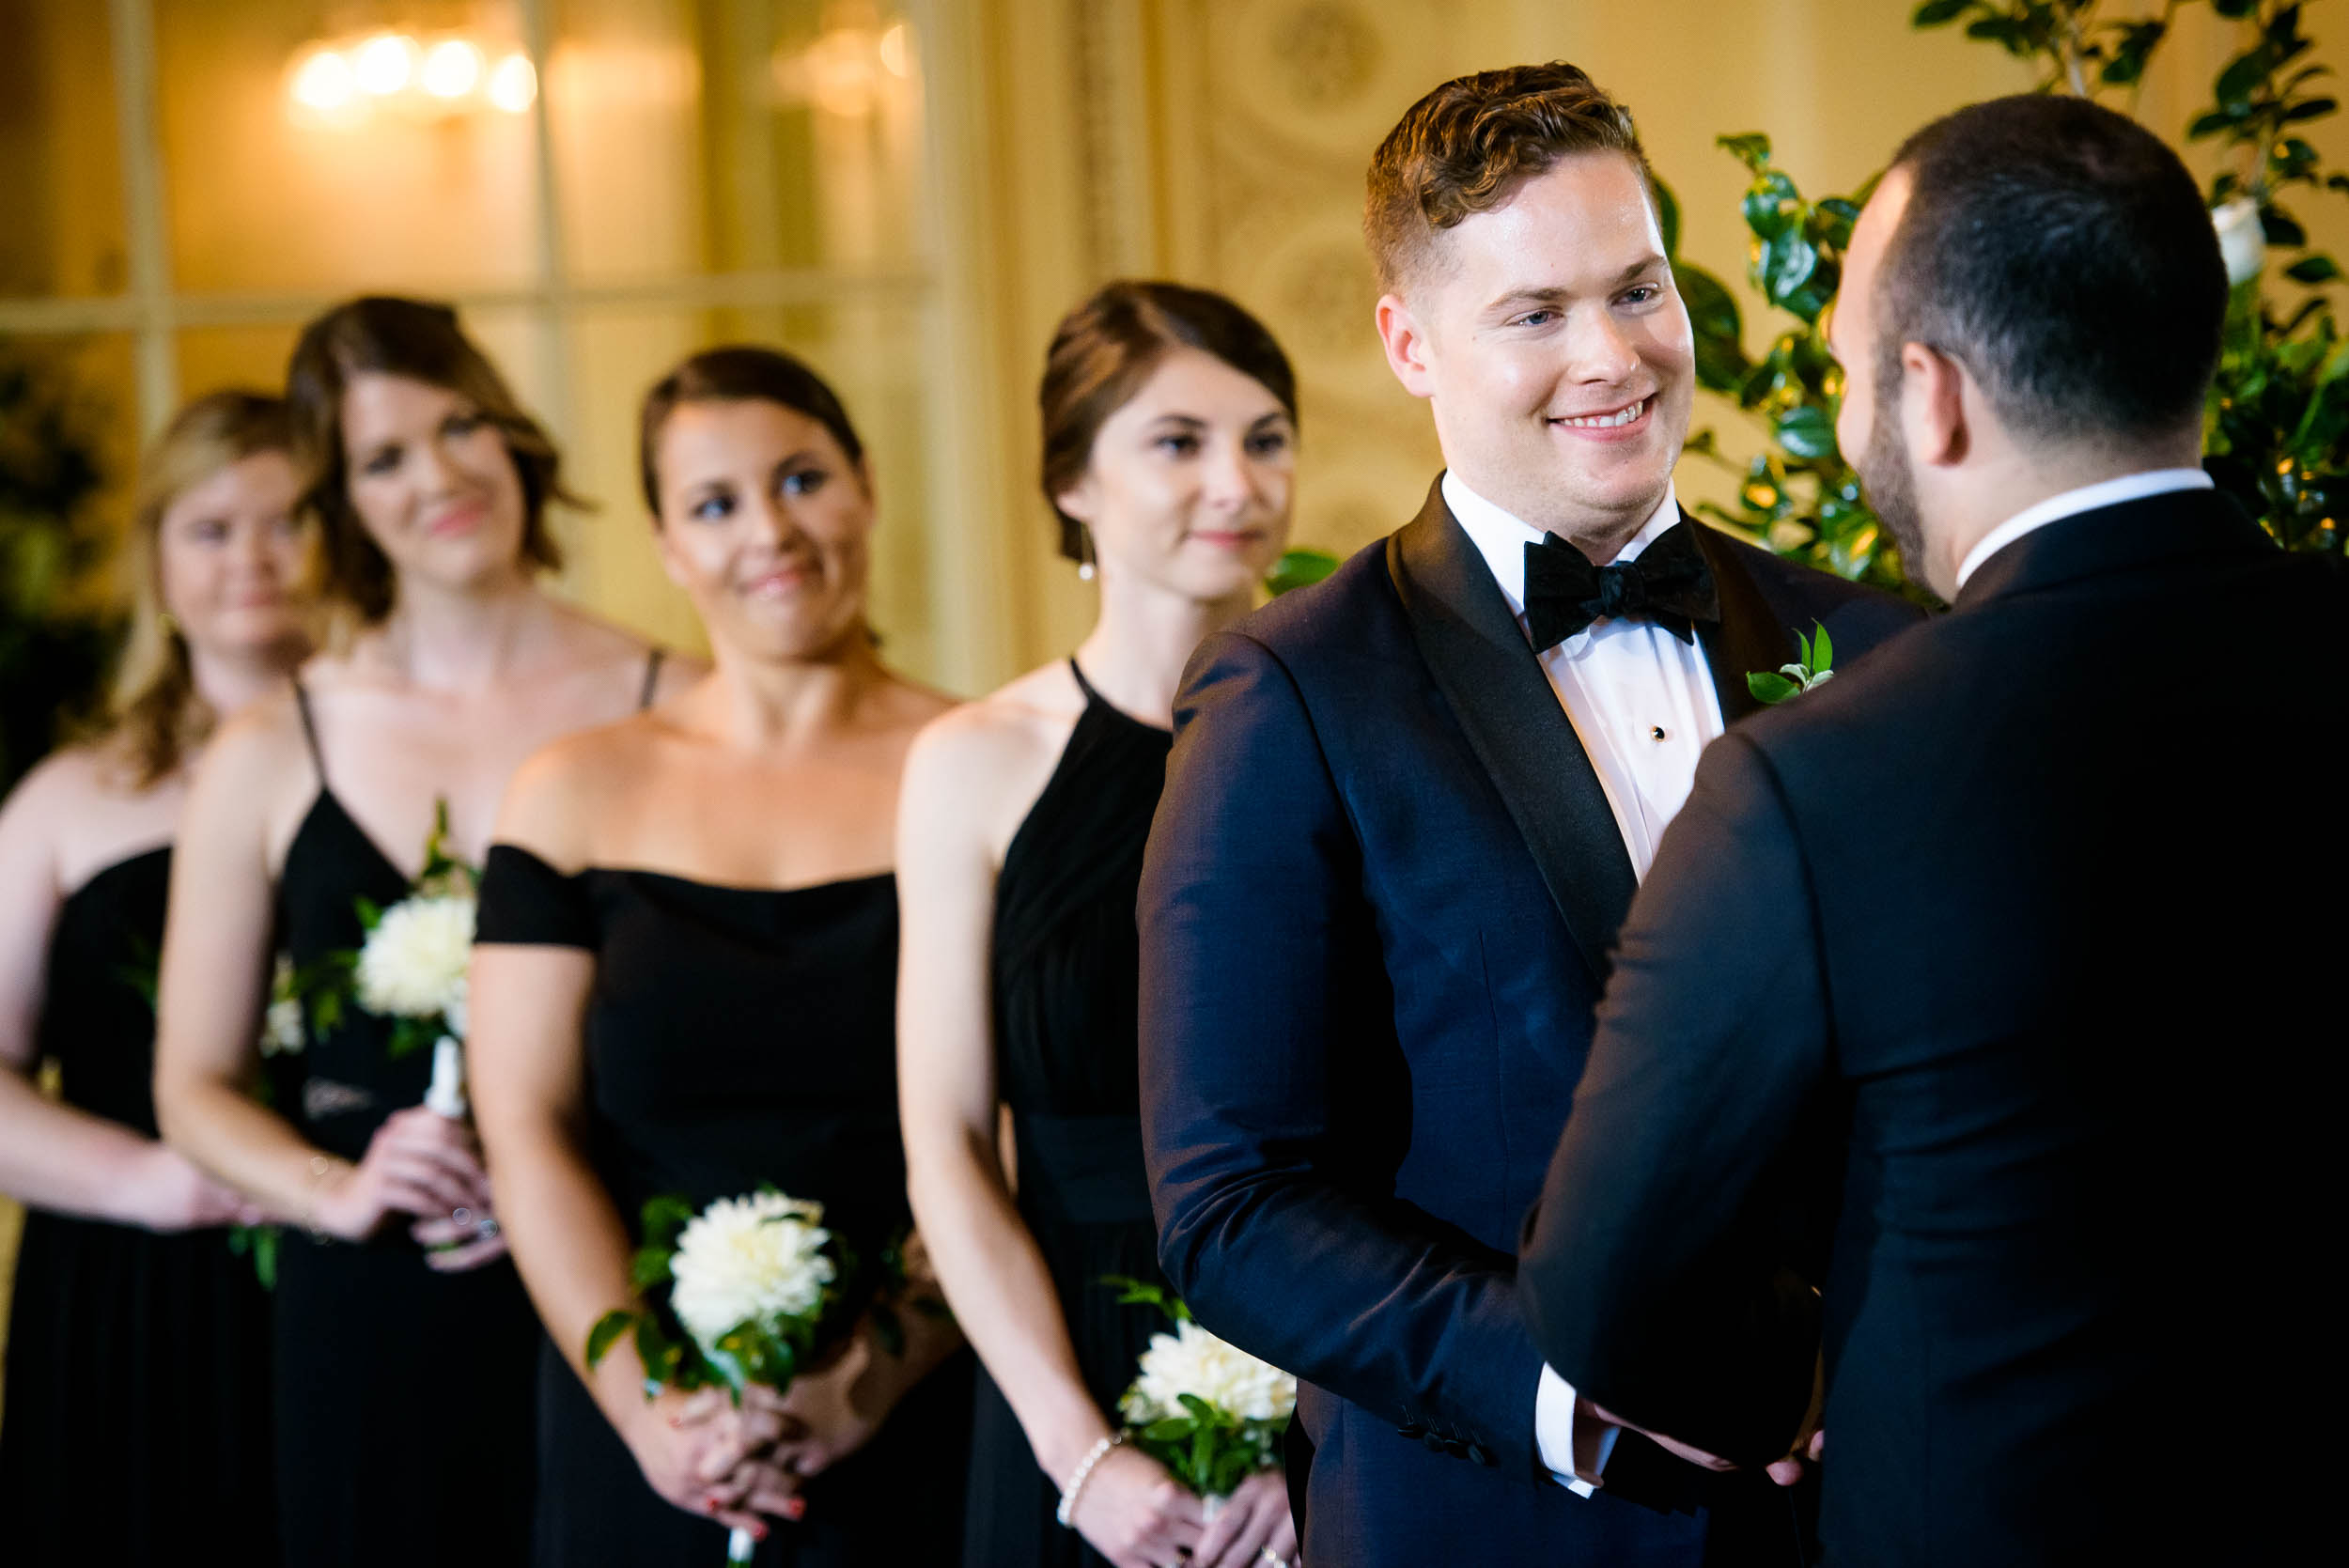 Modern wedding ceremony for luxurious fall wedding at the Chicago Symphony Center captured by J. Brown Photography. See more wedding ideas at jbrownphotography.com!